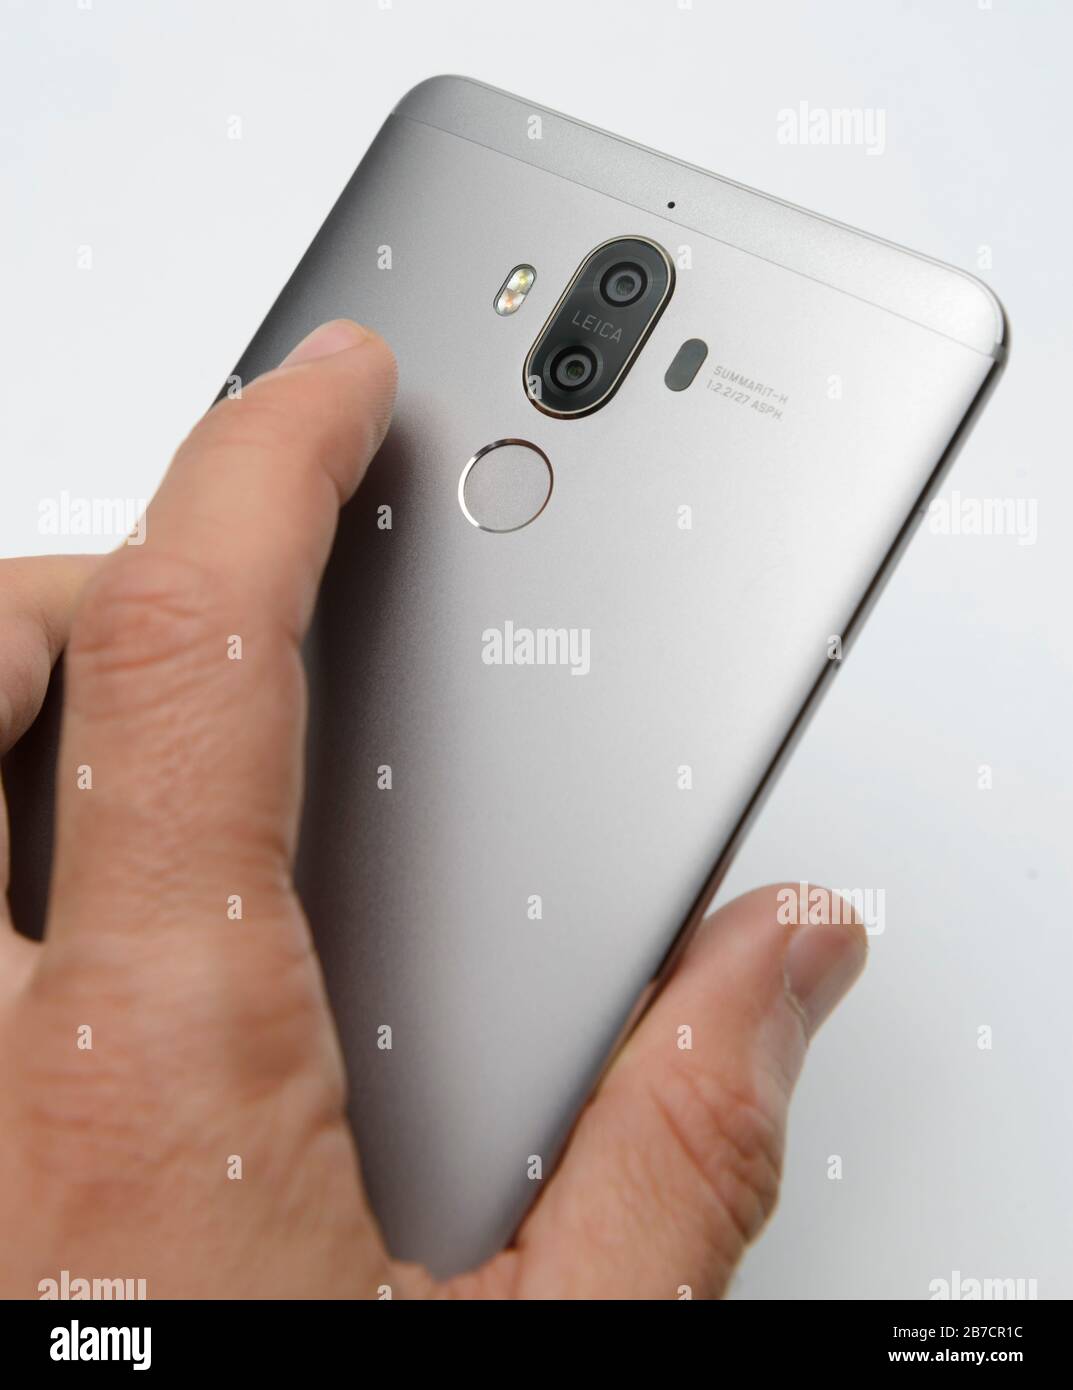 Rear view of a smartphone with dual camera lenses and a fingerprint scanner  Stock Photo - Alamy